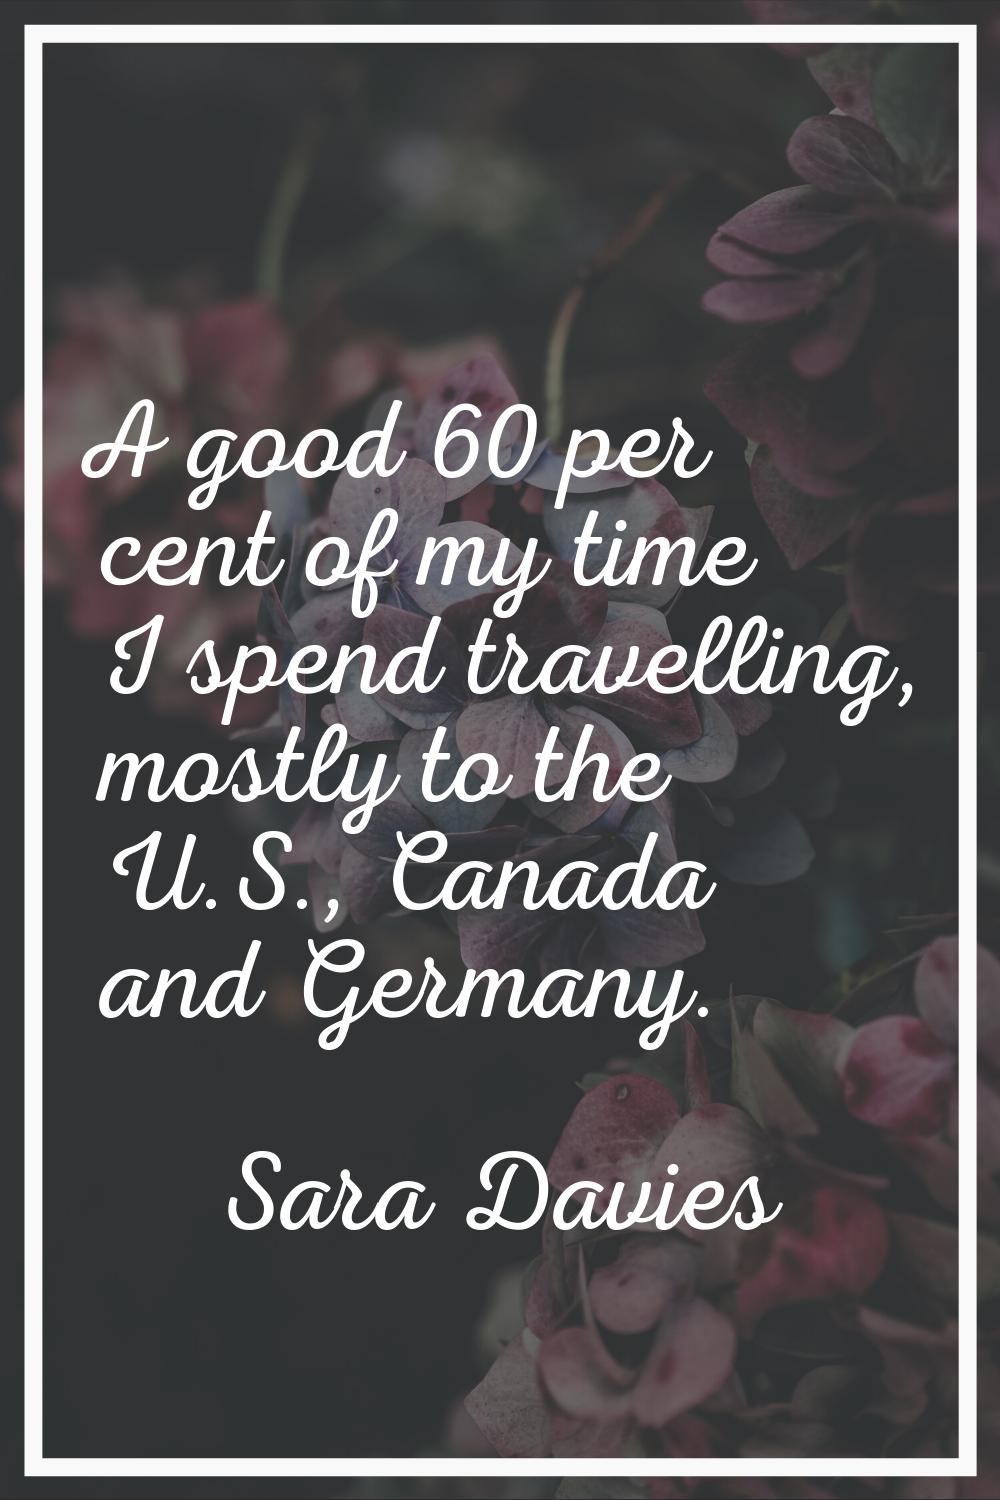 A good 60 per cent of my time I spend travelling, mostly to the U.S., Canada and Germany.